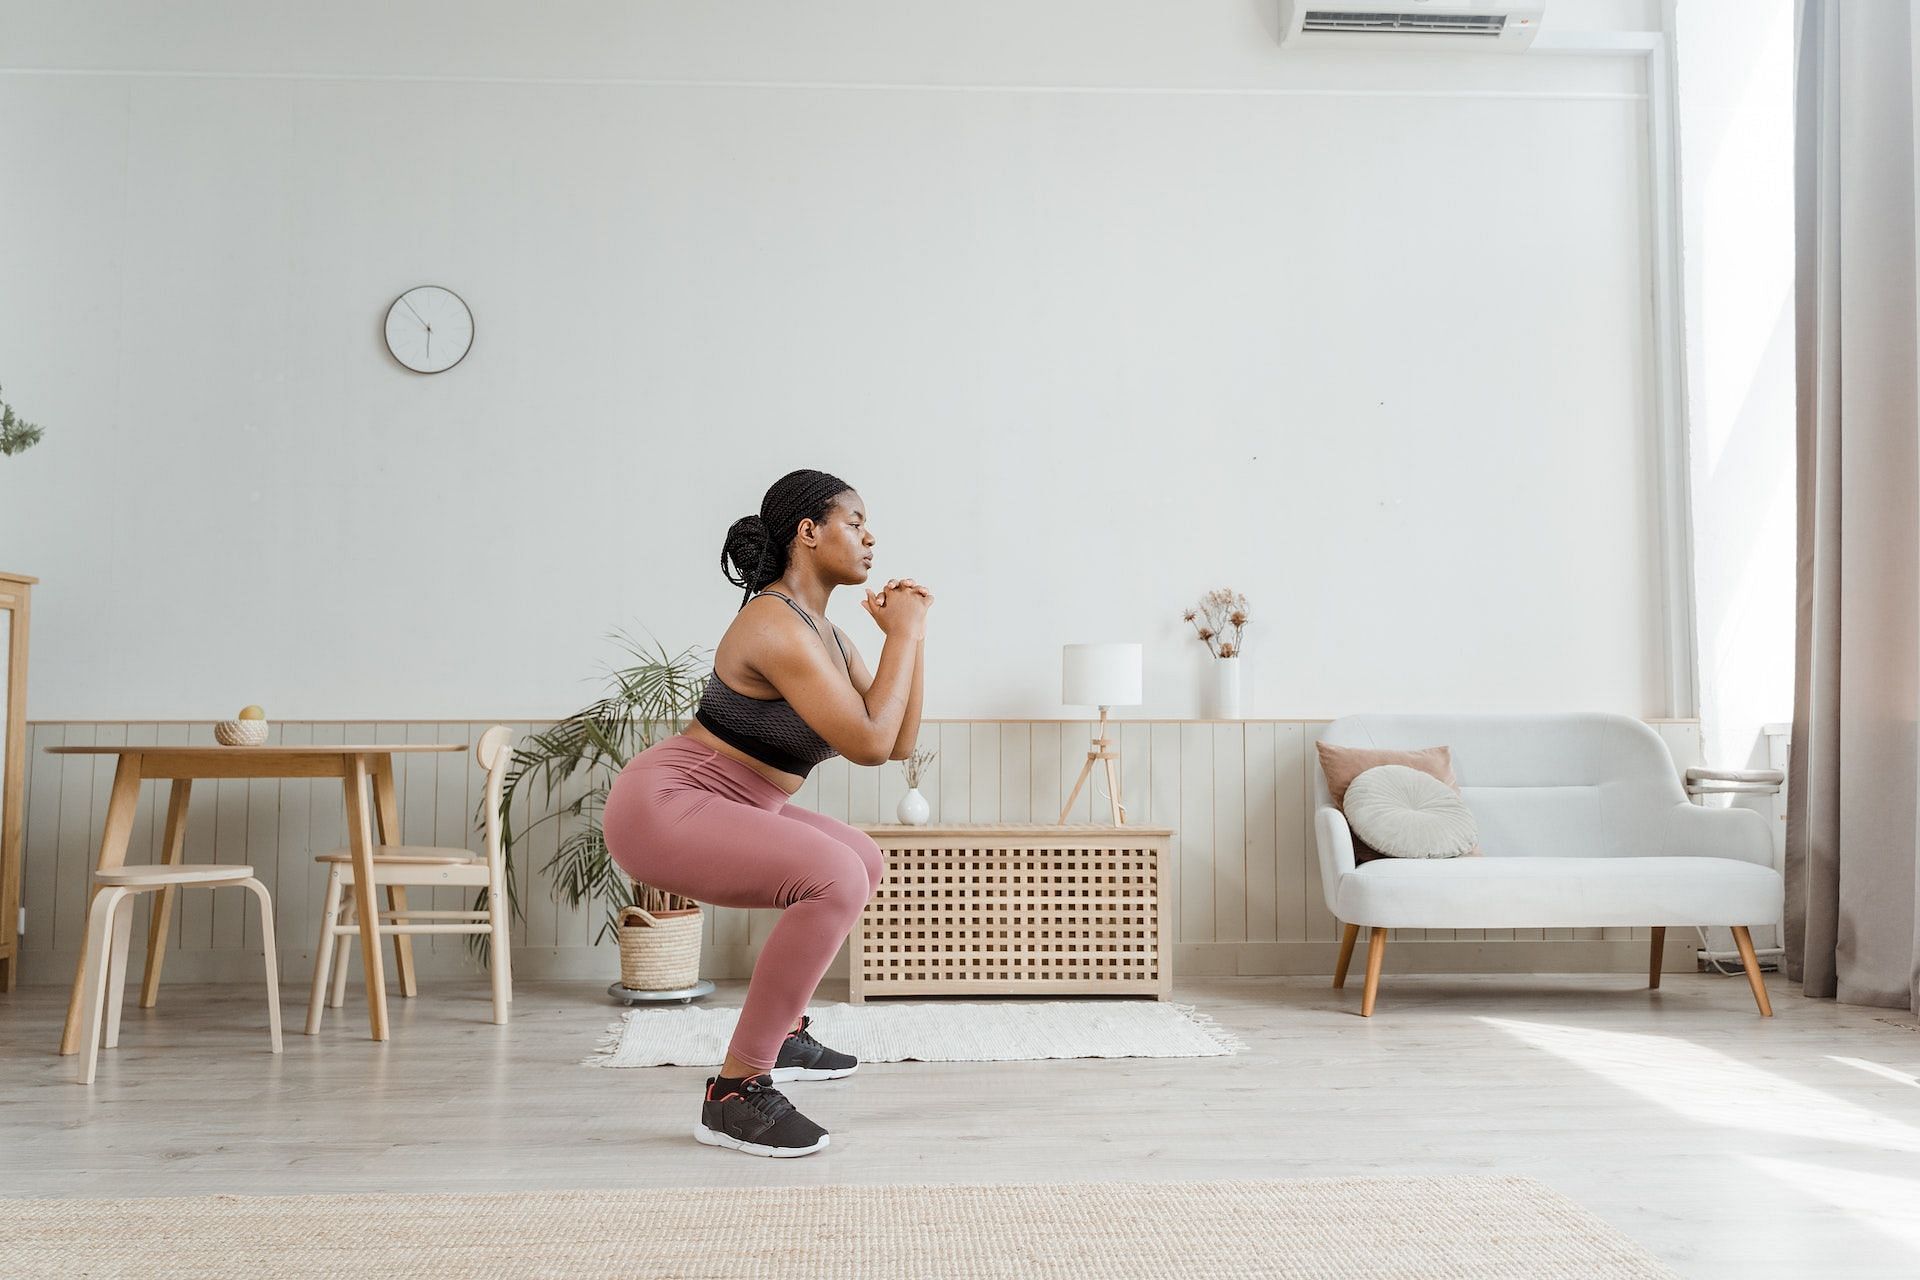 Glute-building exercises are important for the entire lower body. (Photo via Pexels/MART PRODUCTION)